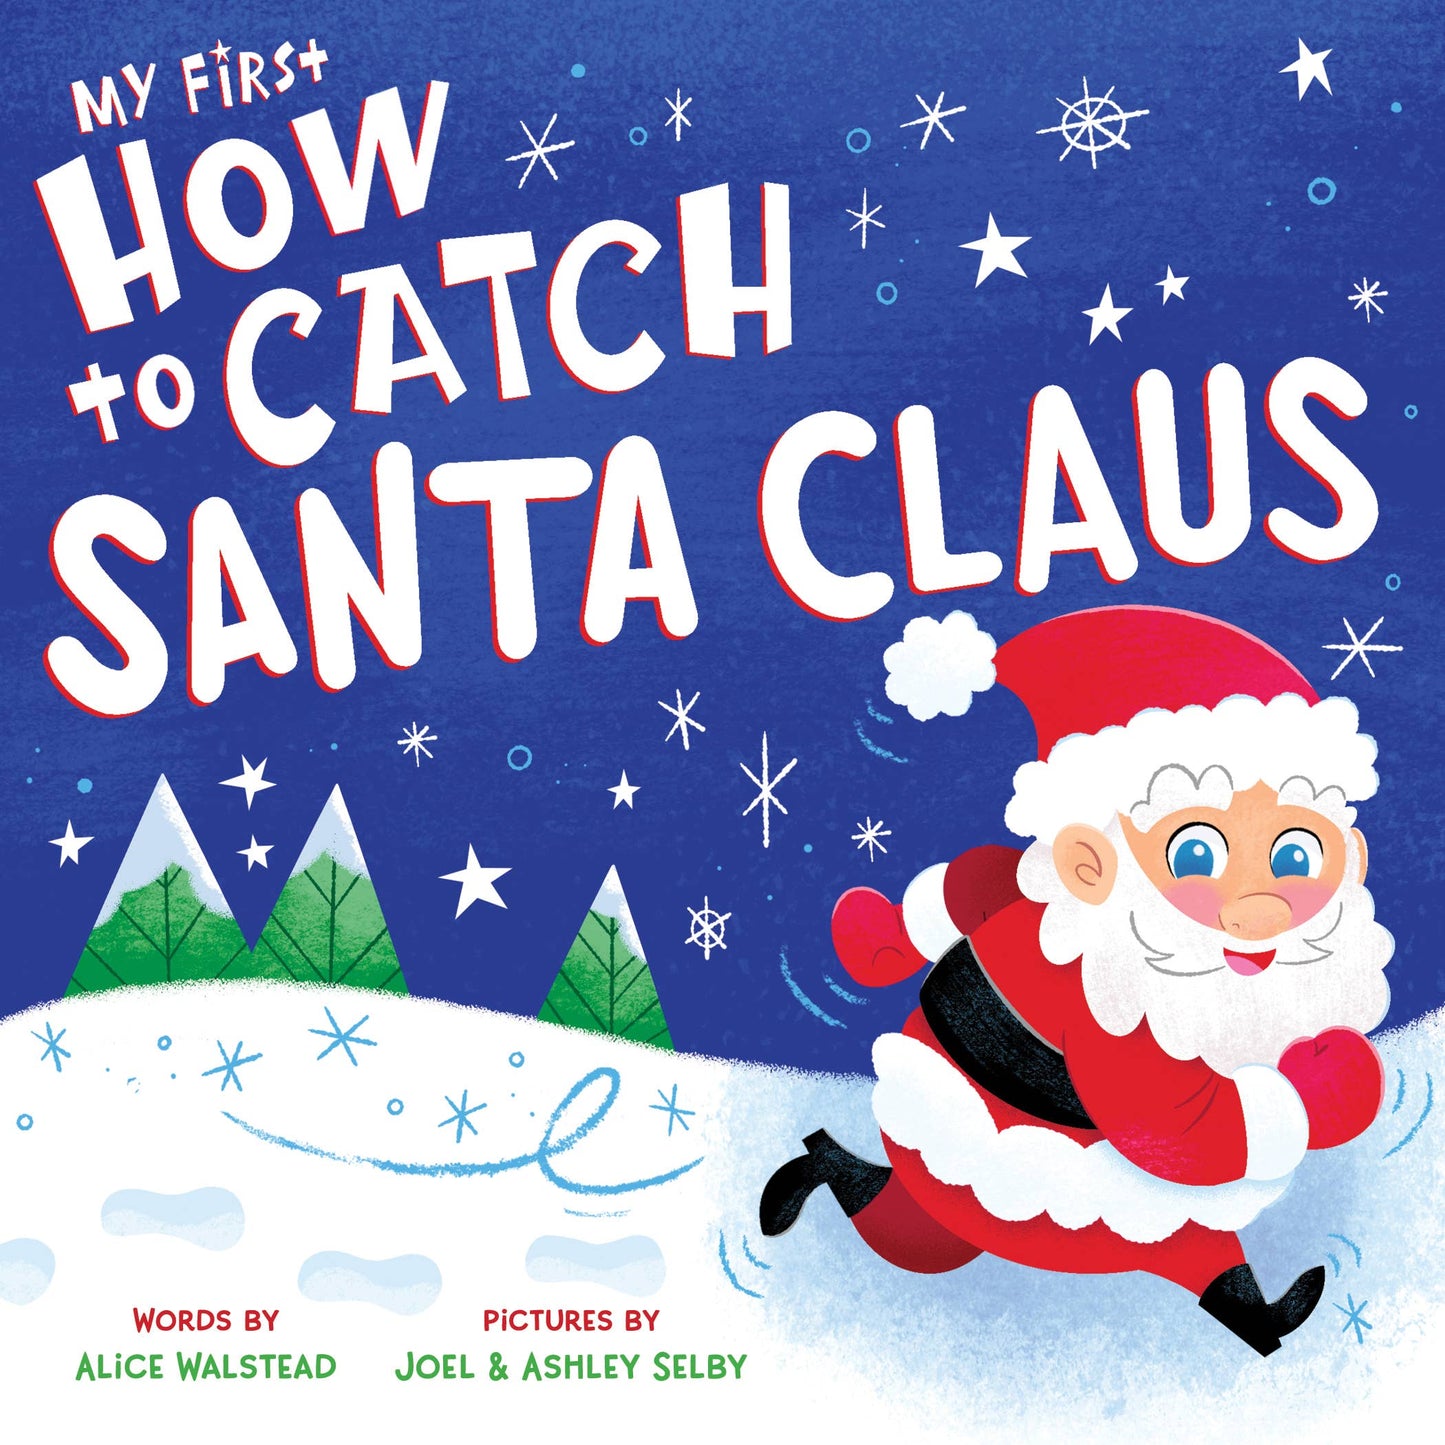 My First How To Catch Santa Claus by Alice Walstead (Board Book)